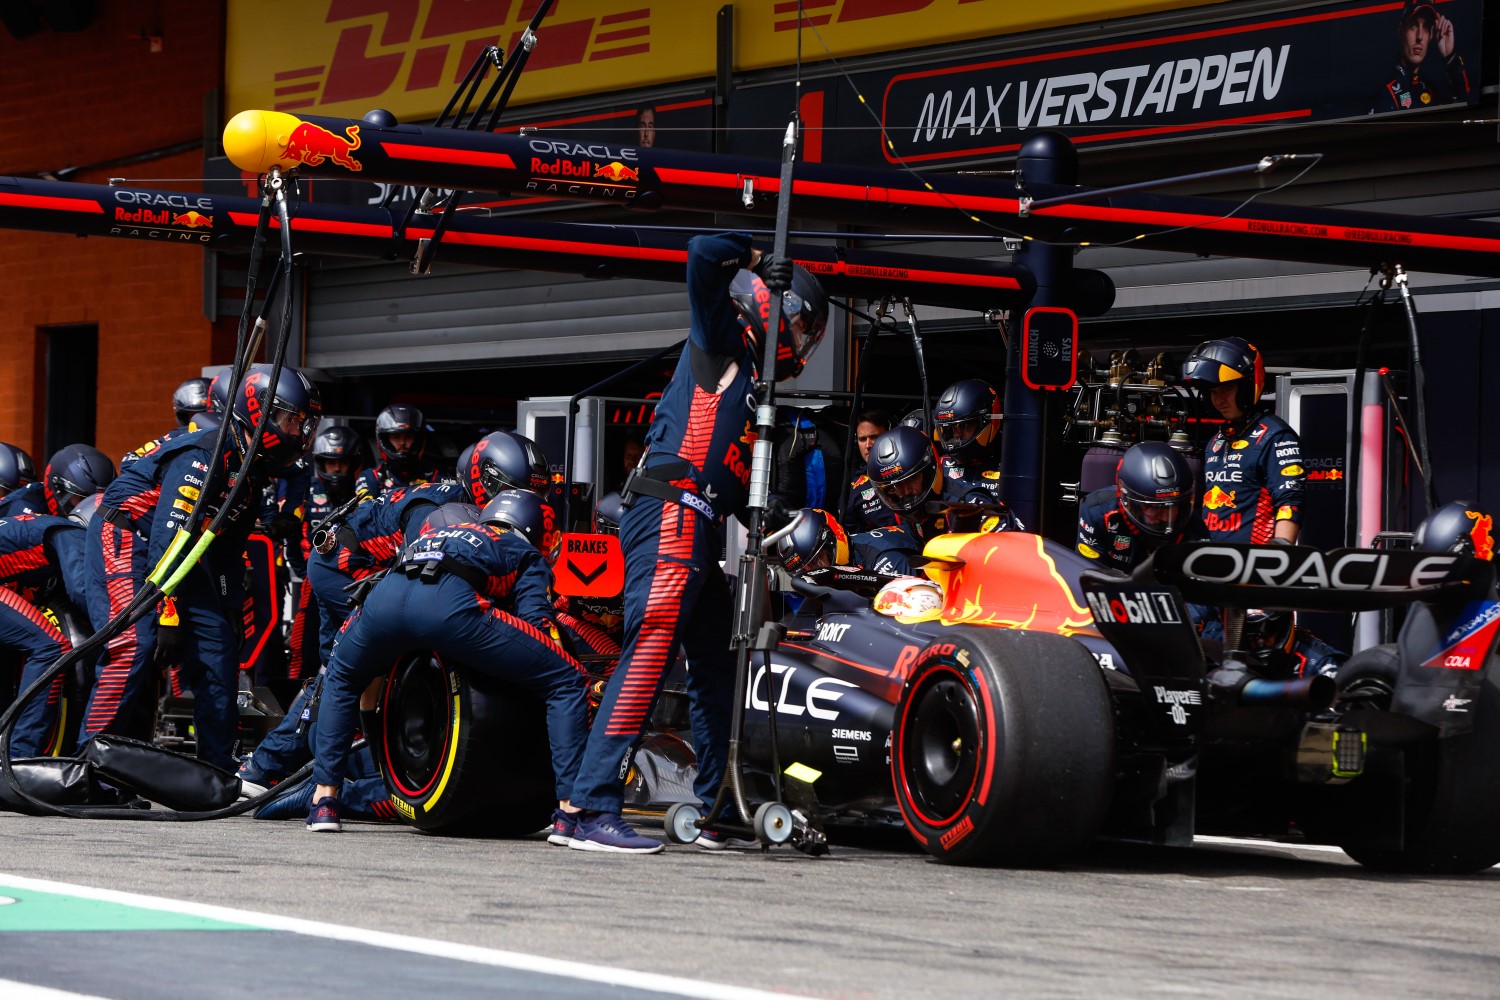 Max Verstappen, Red Bull Racing RB19, in the pits during the Belgian GP at Circuit de Spa Francorchamps on Sunday July 30, 2023 in Spa, Belgium. (Photo by Steven Tee / LAT Images)